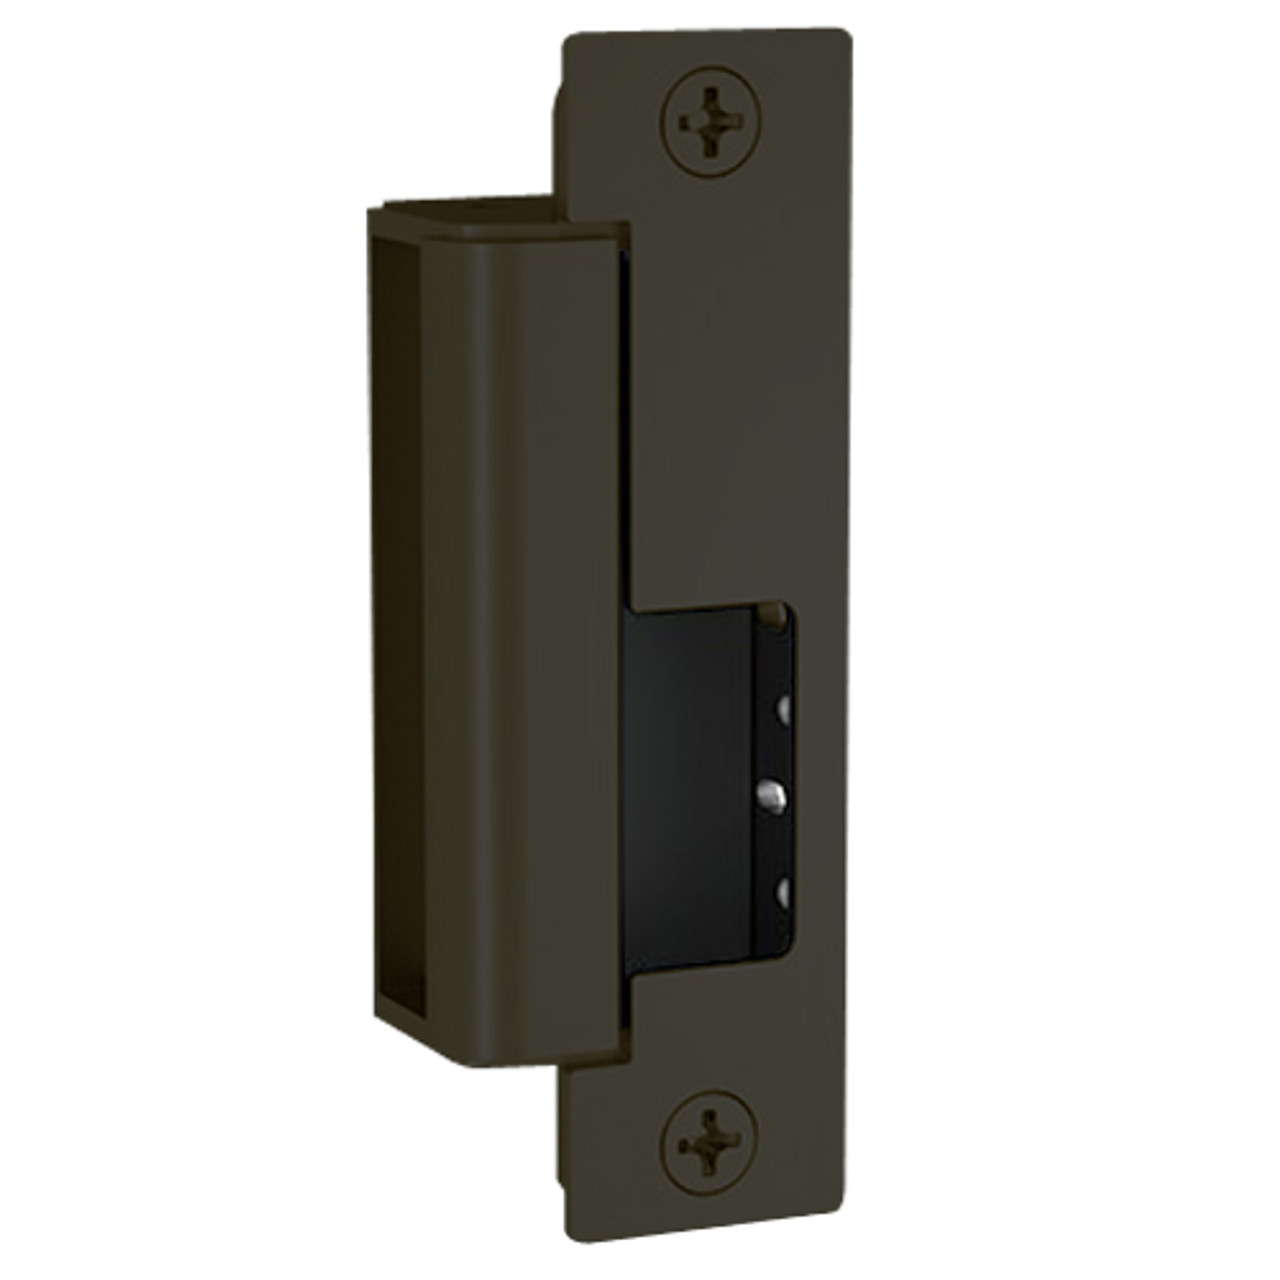 1500C-LM-613E Hes 1500 Series Heavy Duty Complete Electric Strike with Lock Monitor in Dark Oxidized Satin Bronze